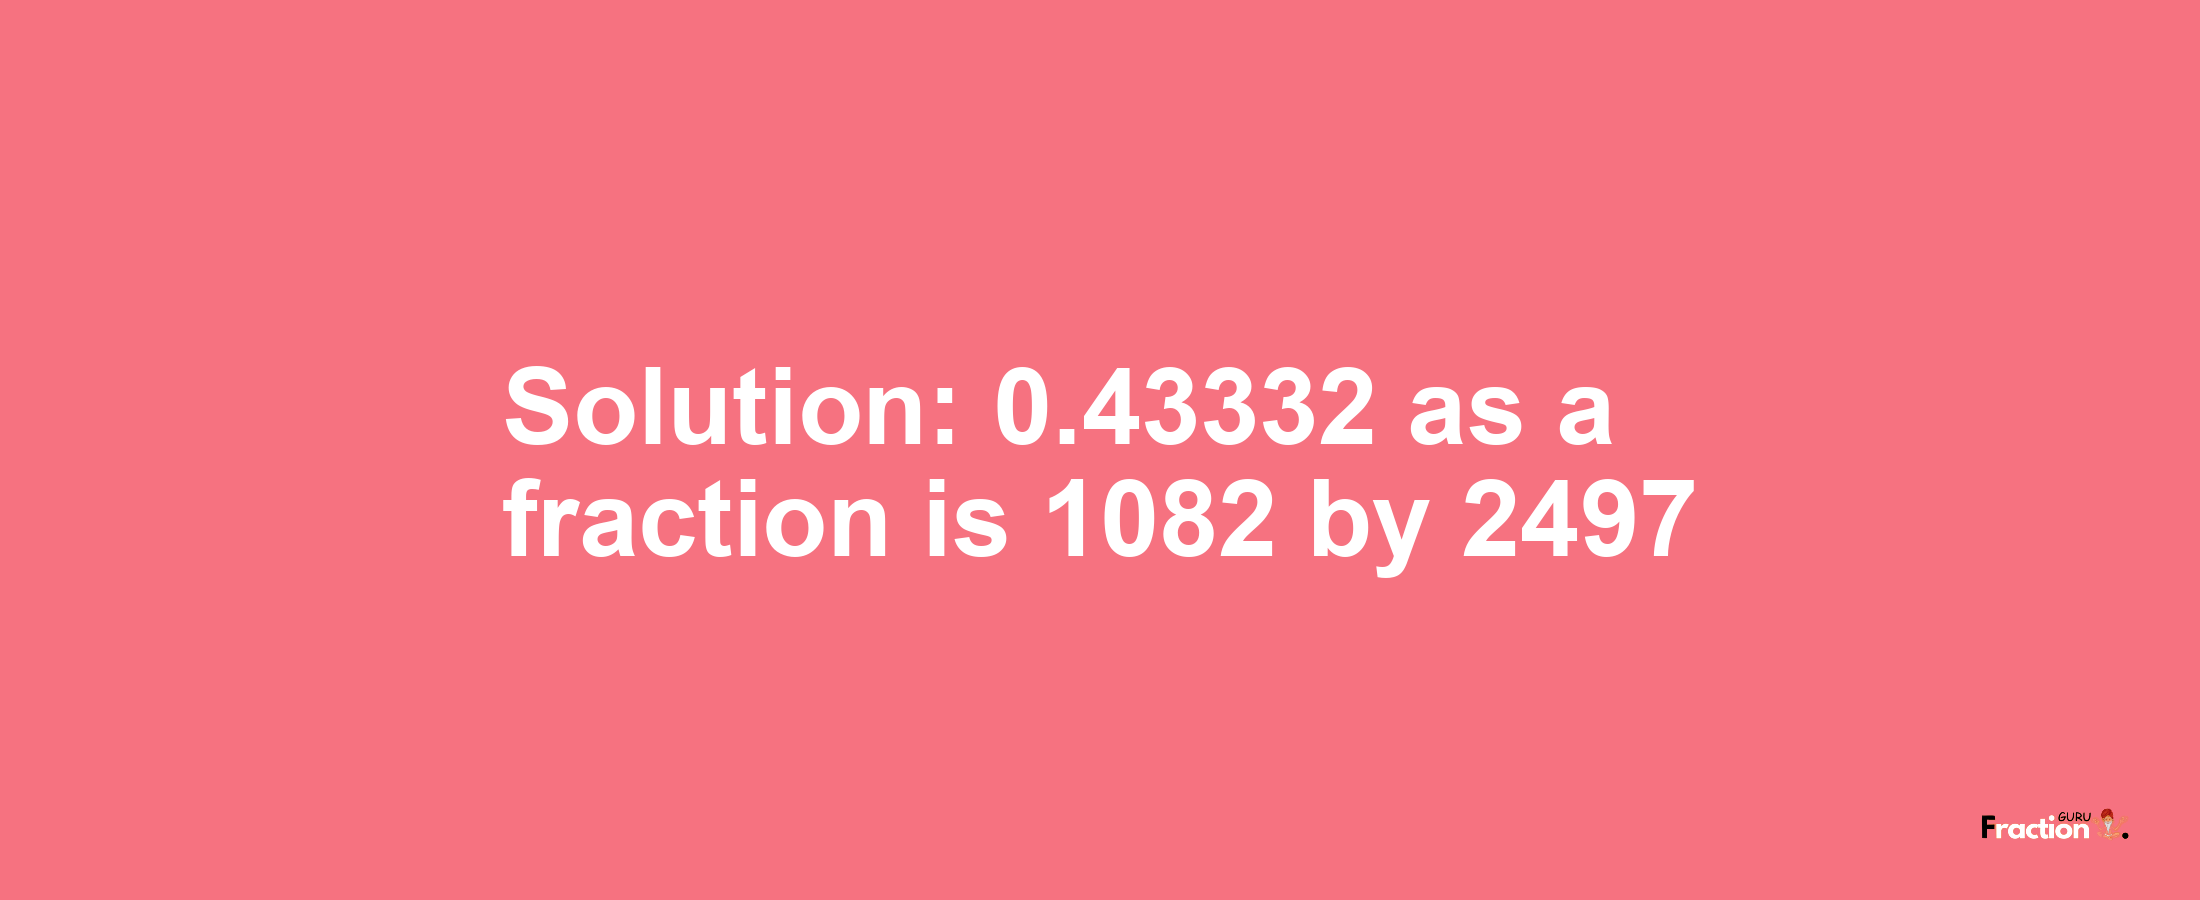 Solution:0.43332 as a fraction is 1082/2497